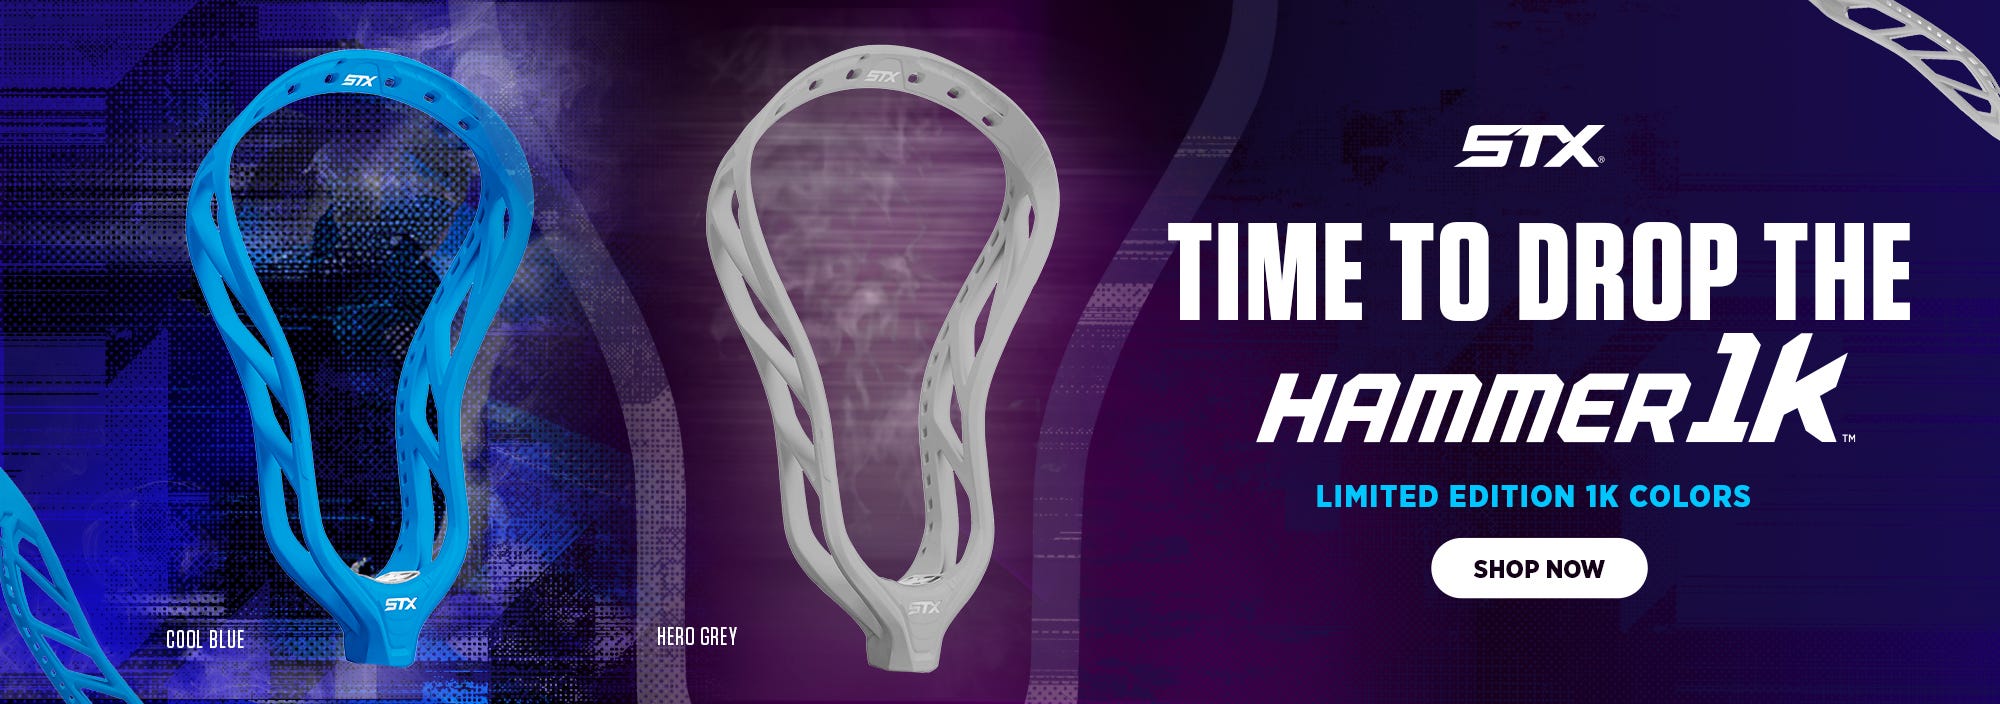 STX Hammer 1K Lacrosse Head Limited Edition Colors